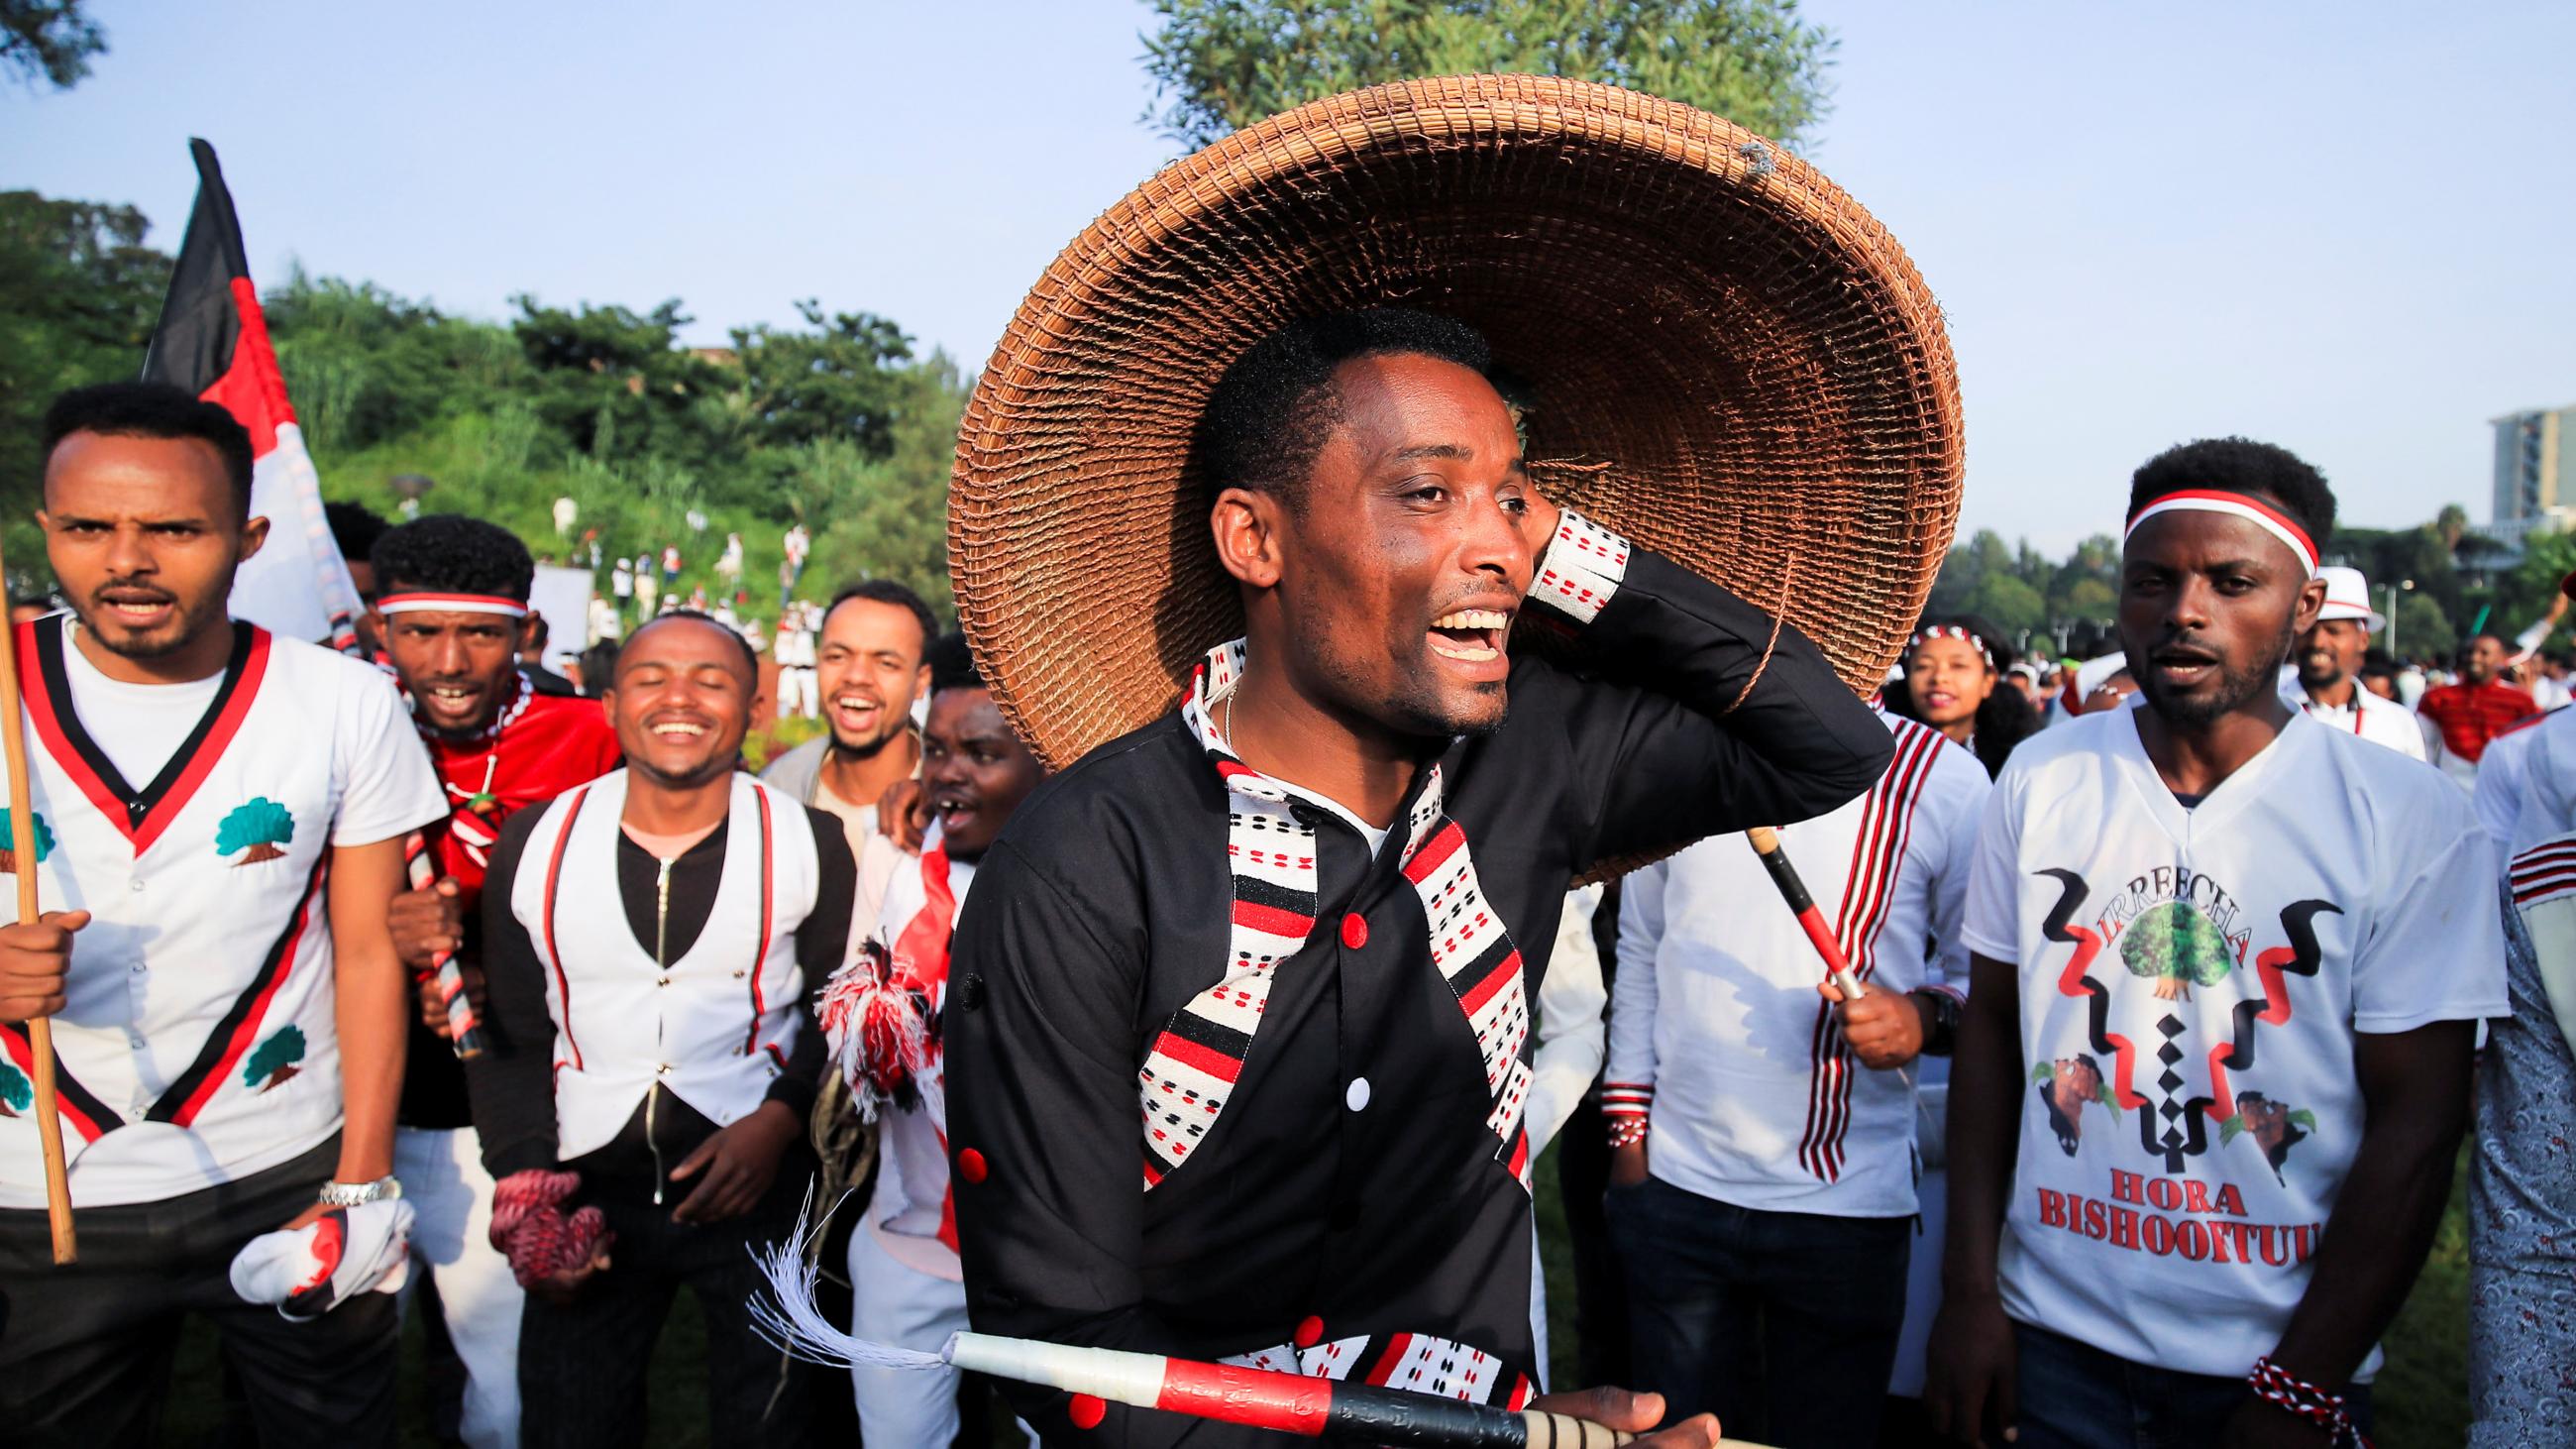 People dance during Irreechaa Festival, the Oromo People thanksgiving ceremony at the Hora Finfinnee, in Addis Ababa, Ethiopia, on October 2, 2021.